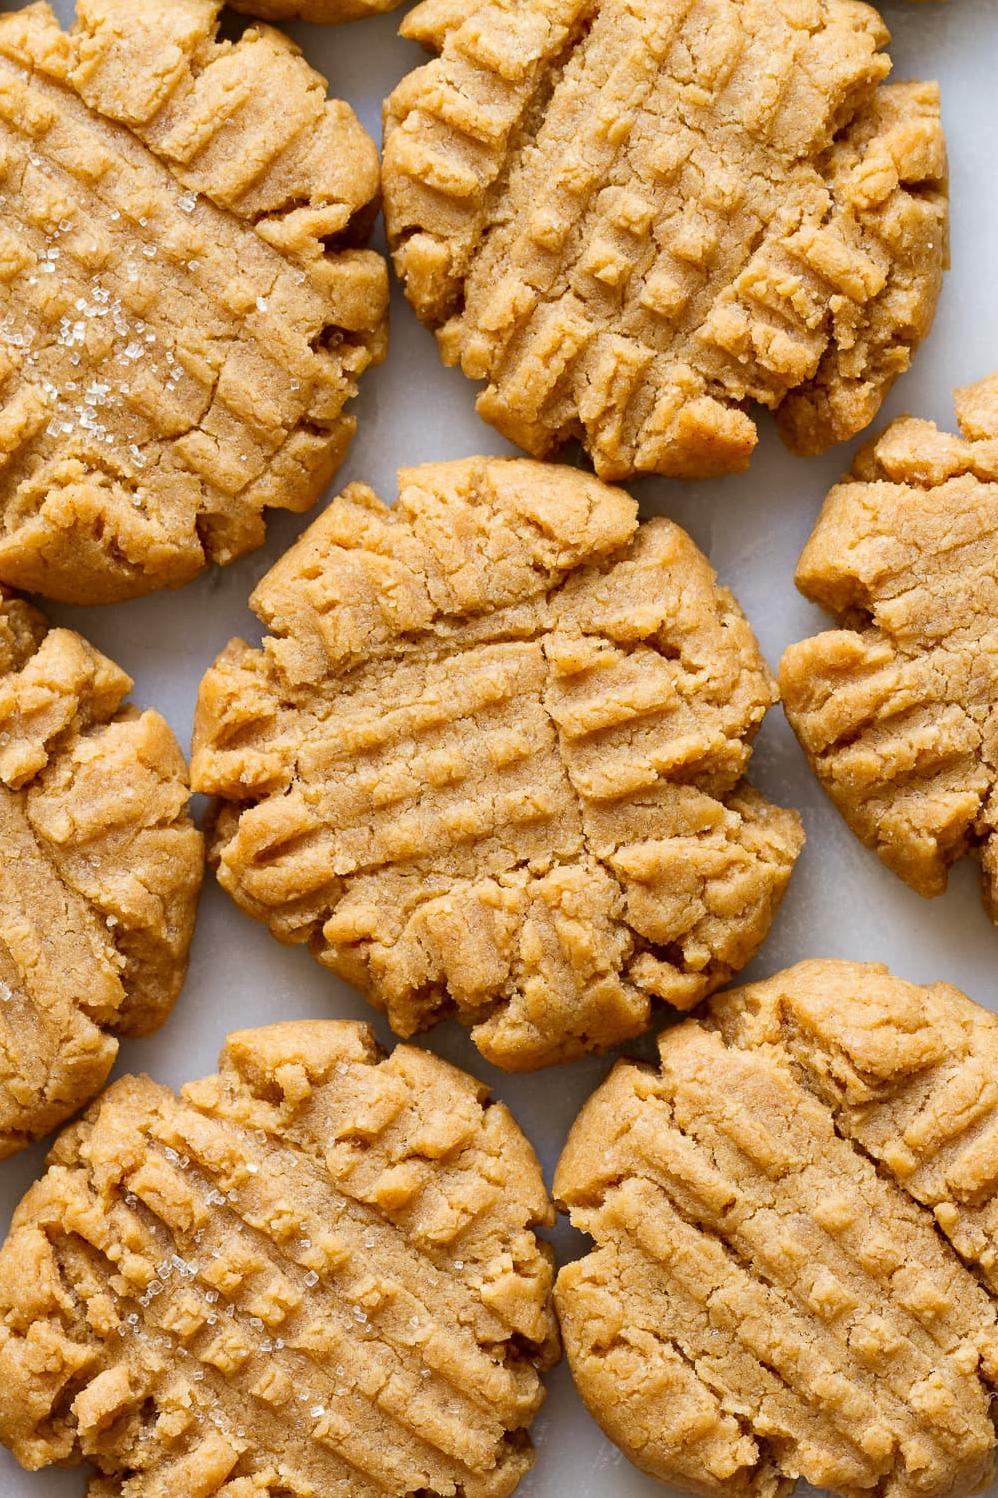  This peanut butter recipe is so easy, you'll want to make it every day!